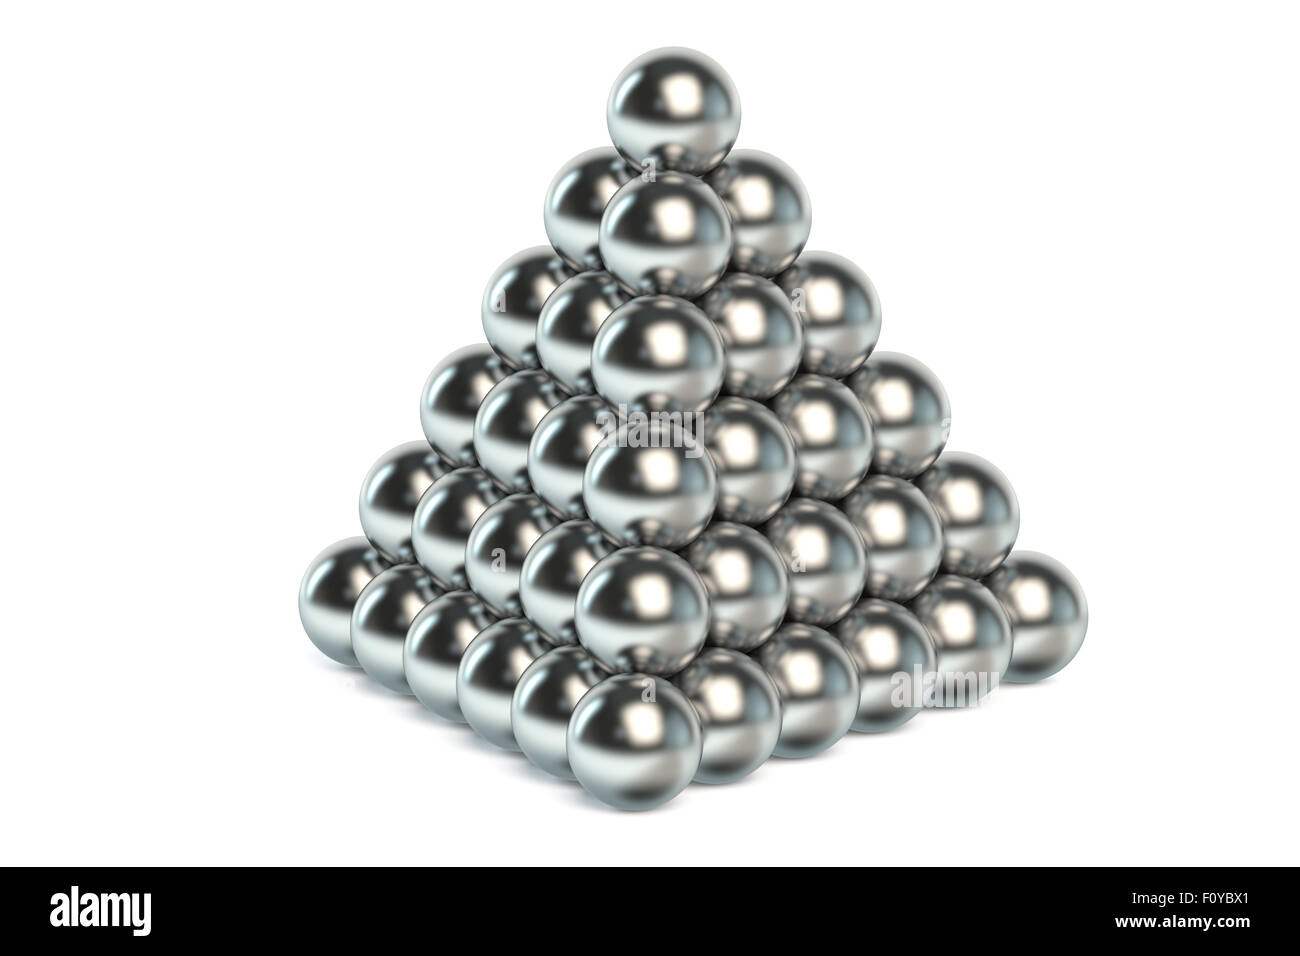 Pyramid of metal balls isolated on white background Stock Photo